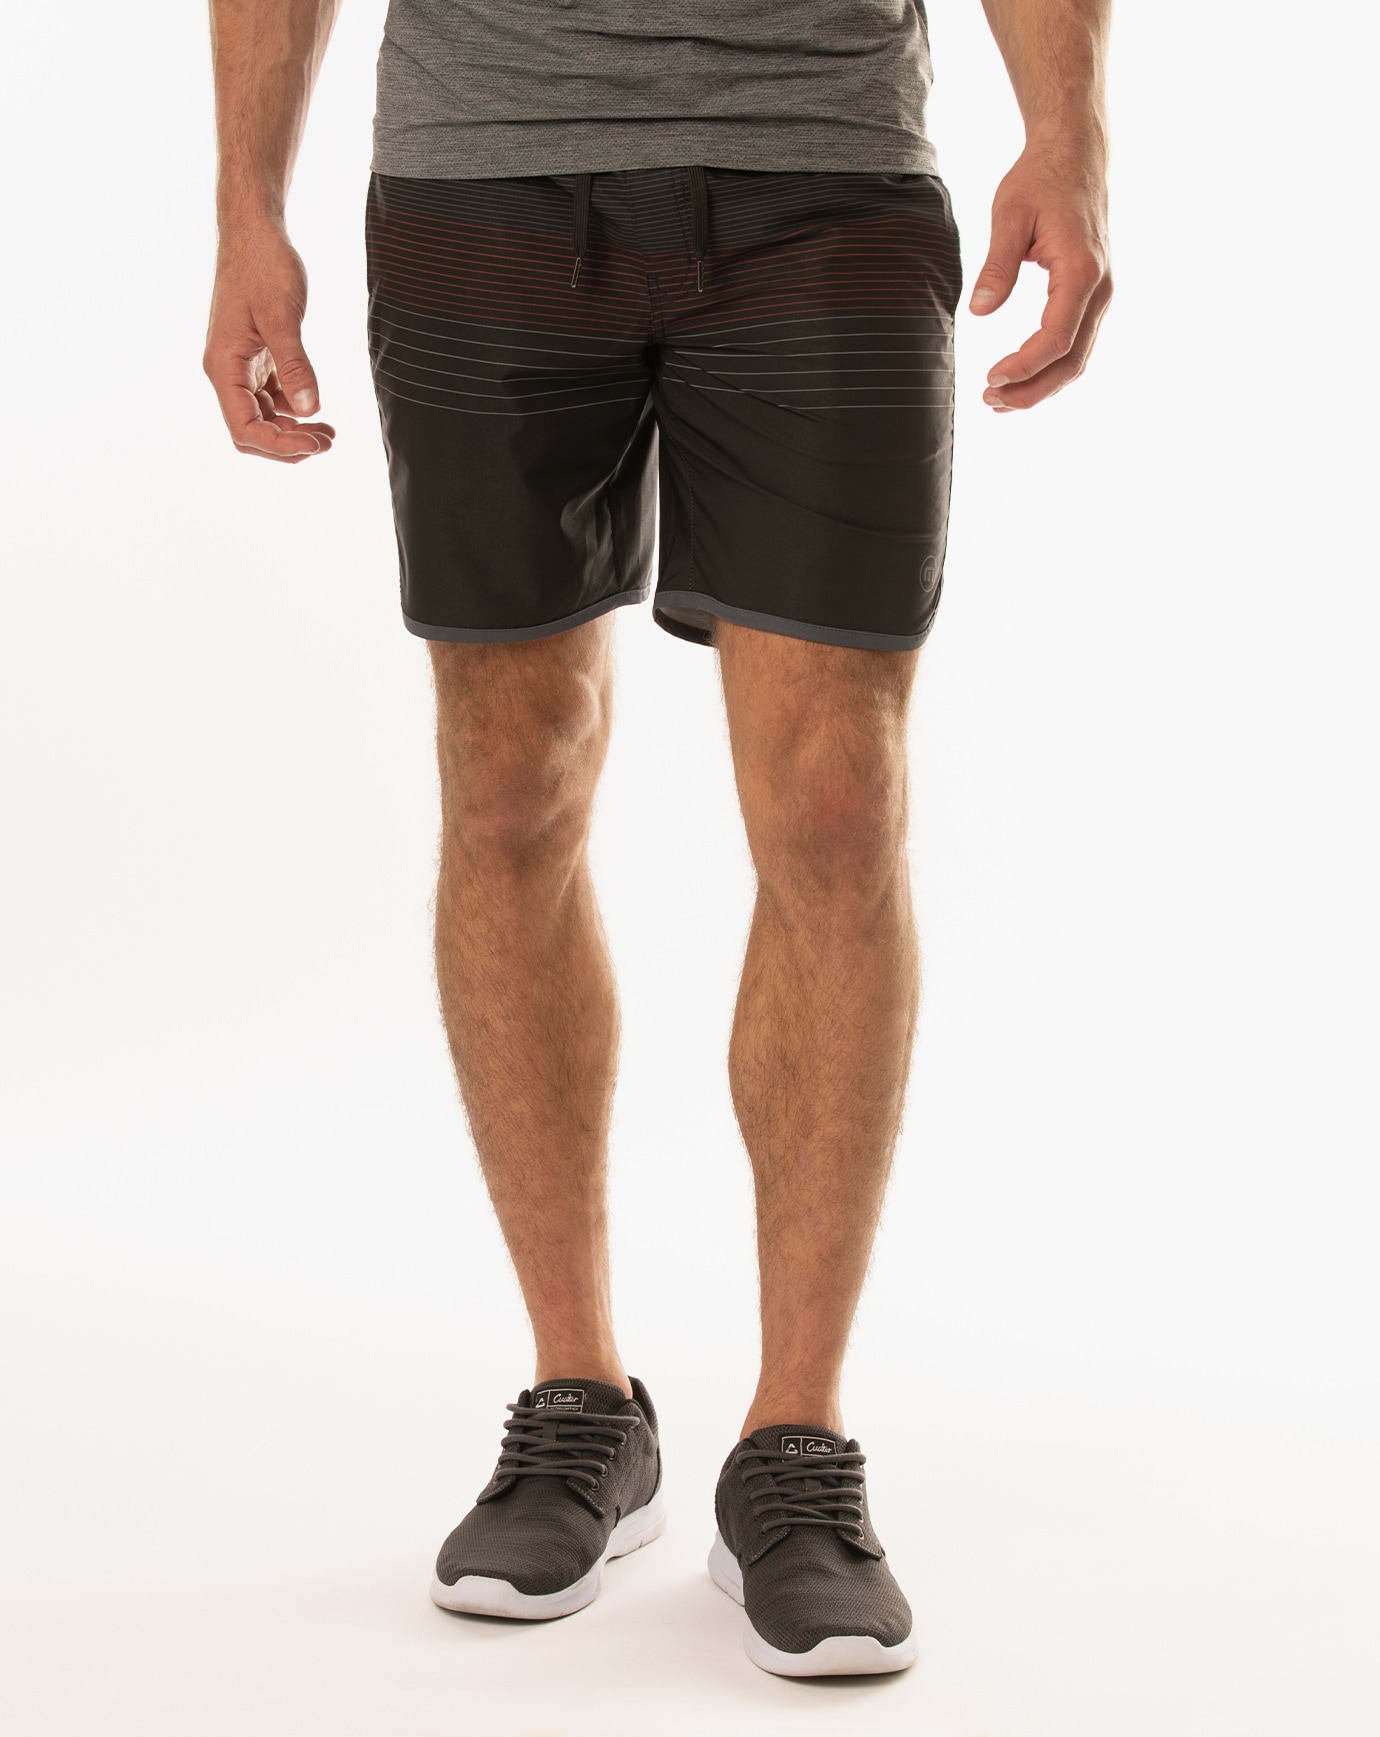 Related Product - GO TIME ACTIVE SHORT